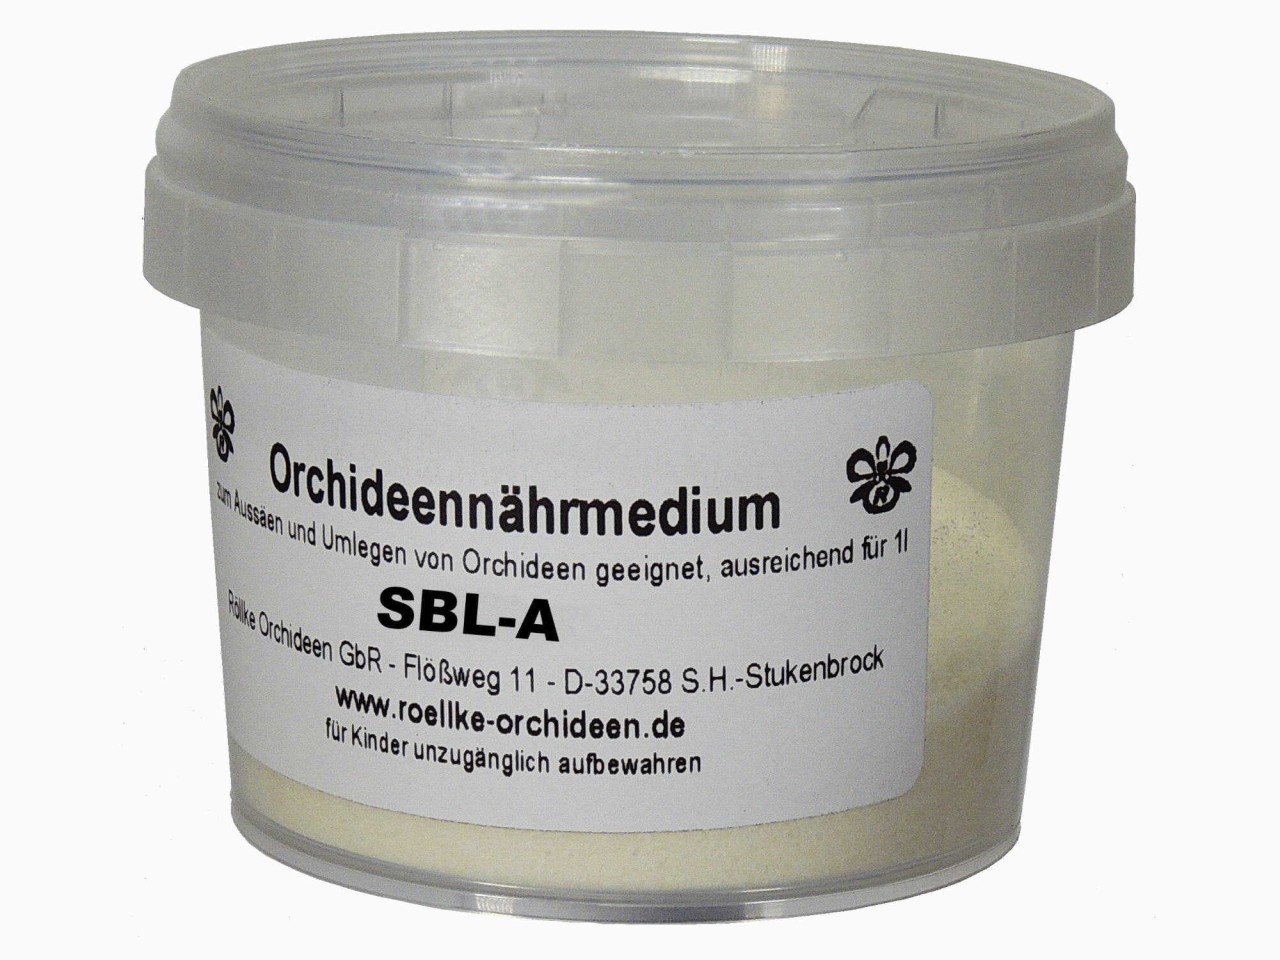 seed sowing and replating medium SBL-A